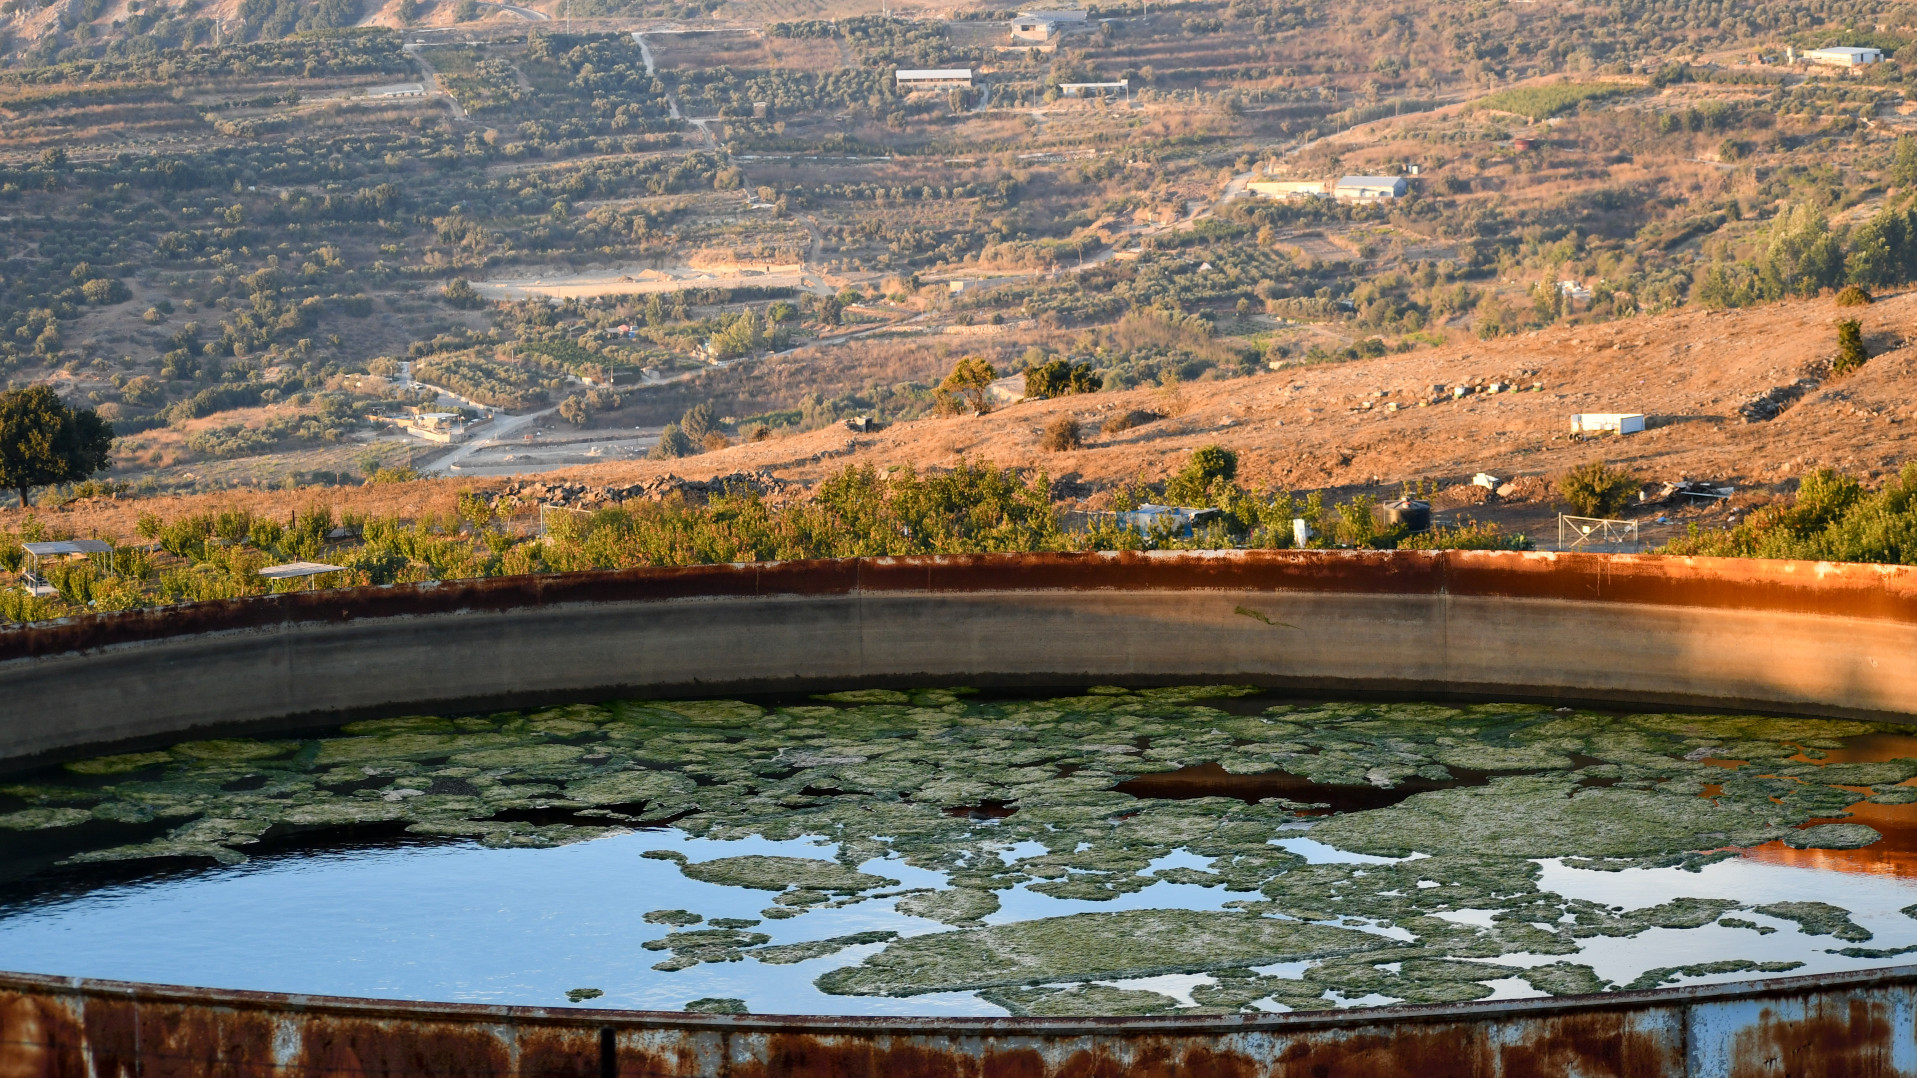 One of many tanks created by local farmers to gather rainwater for agricultural use in the Ra'abanah area of the Occupied Syrian Golan Heights, April 2020 